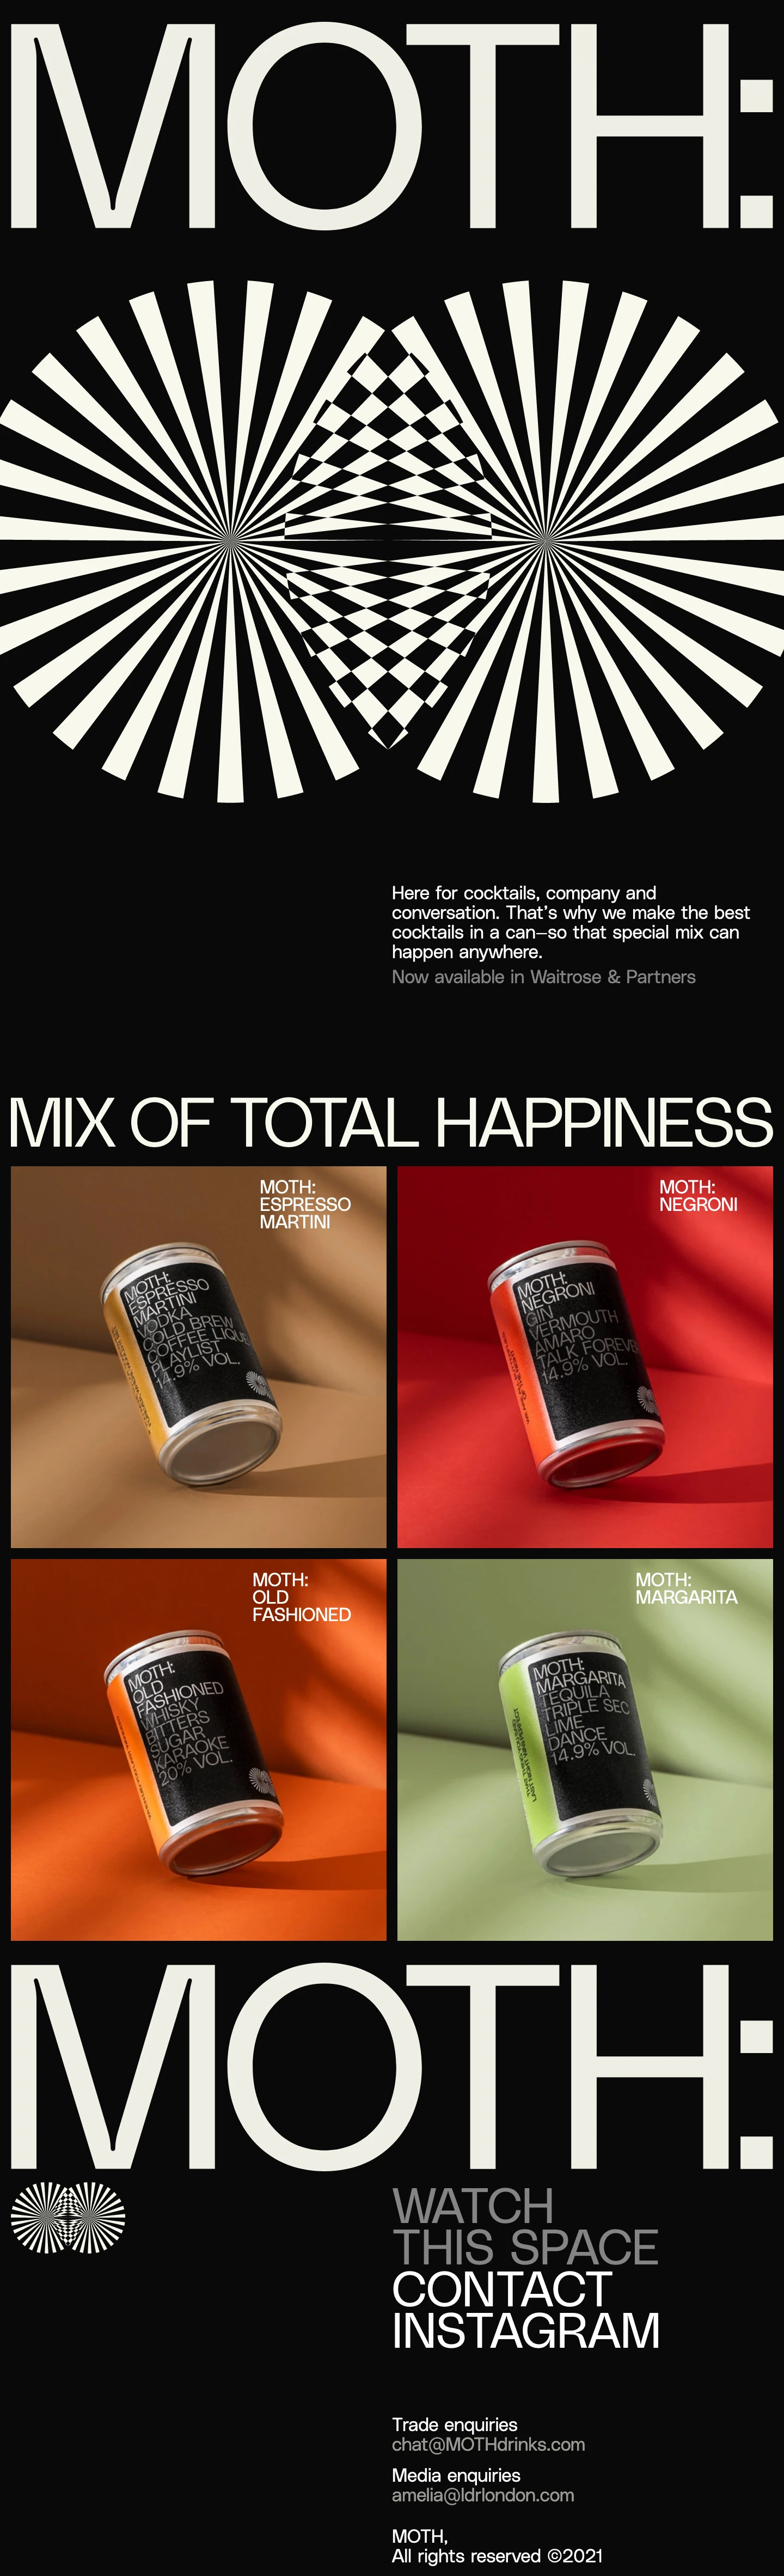 MOTH Landing Page Example: The best cocktails in a can. For friends to enjoy anywhere. Mix of total happiness.